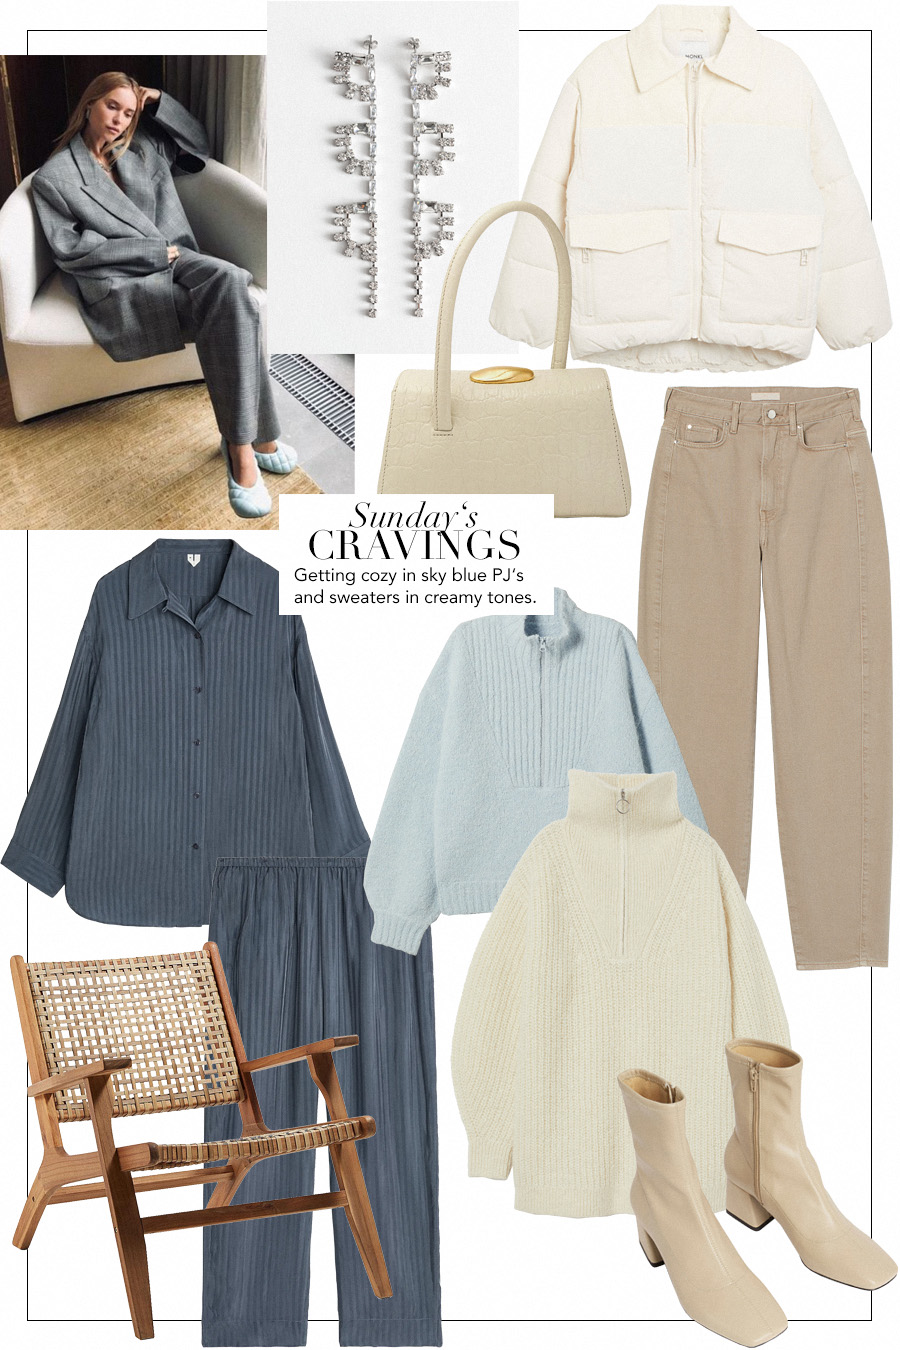 Sunday’s Cravings: Cozy in sky blue and creamy tones